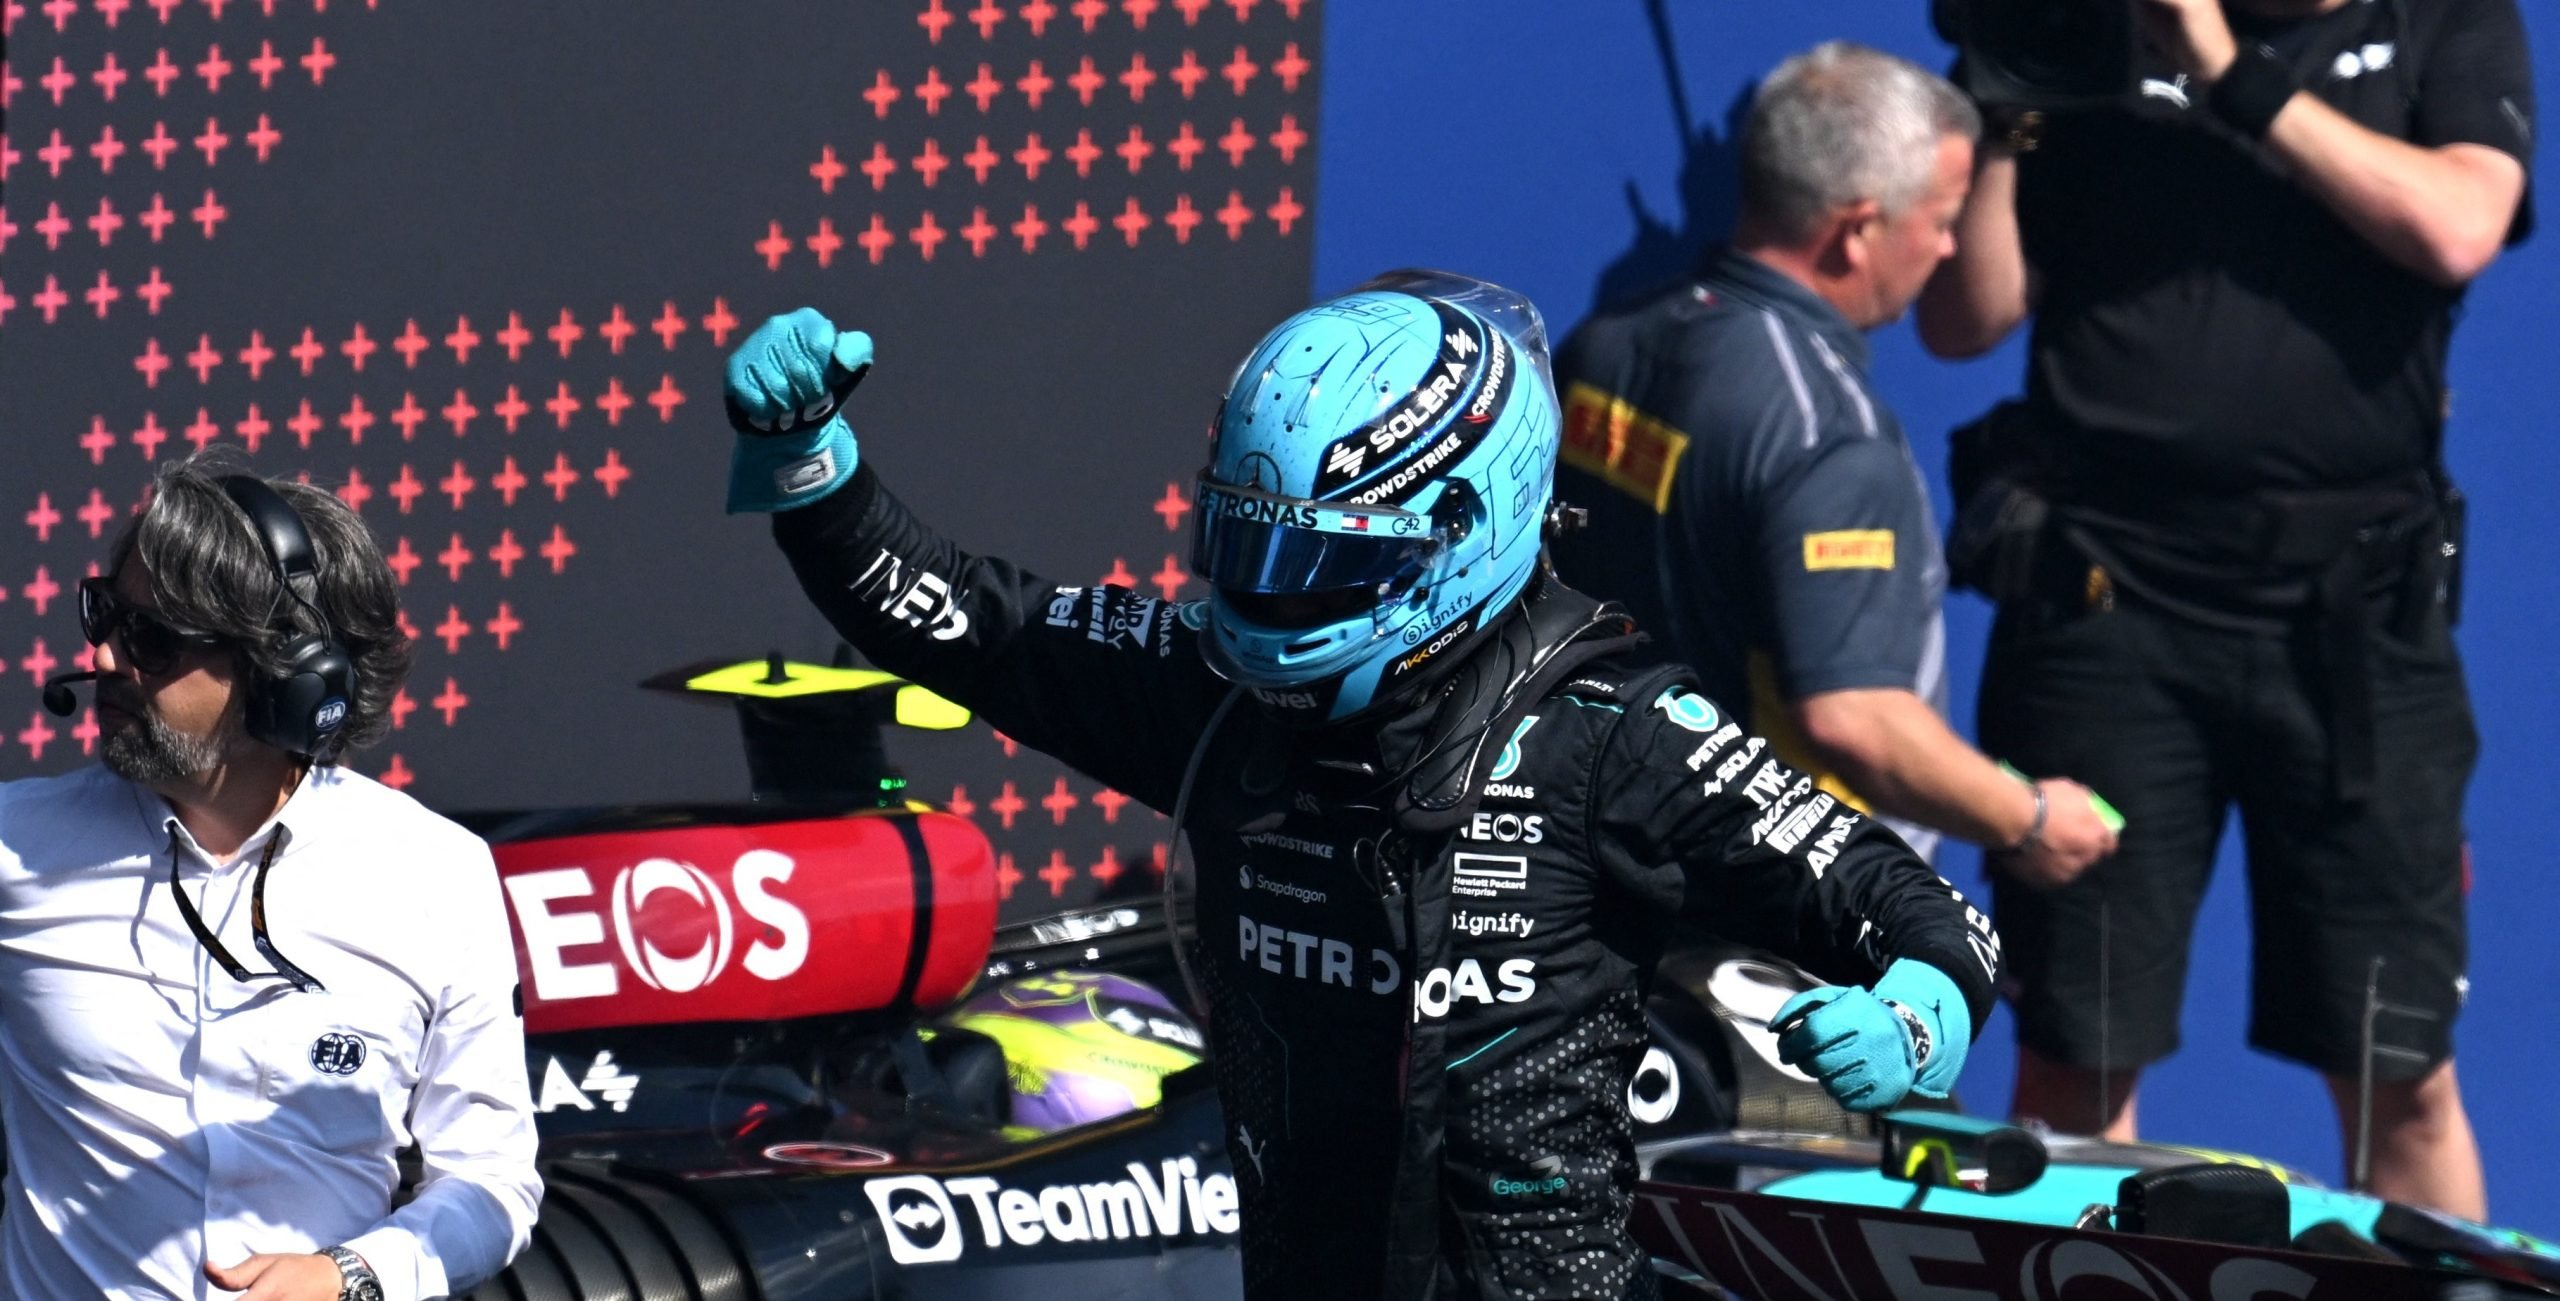 Russell triumphs at the Belgium GP, Mercedes with 1-2 at Spa